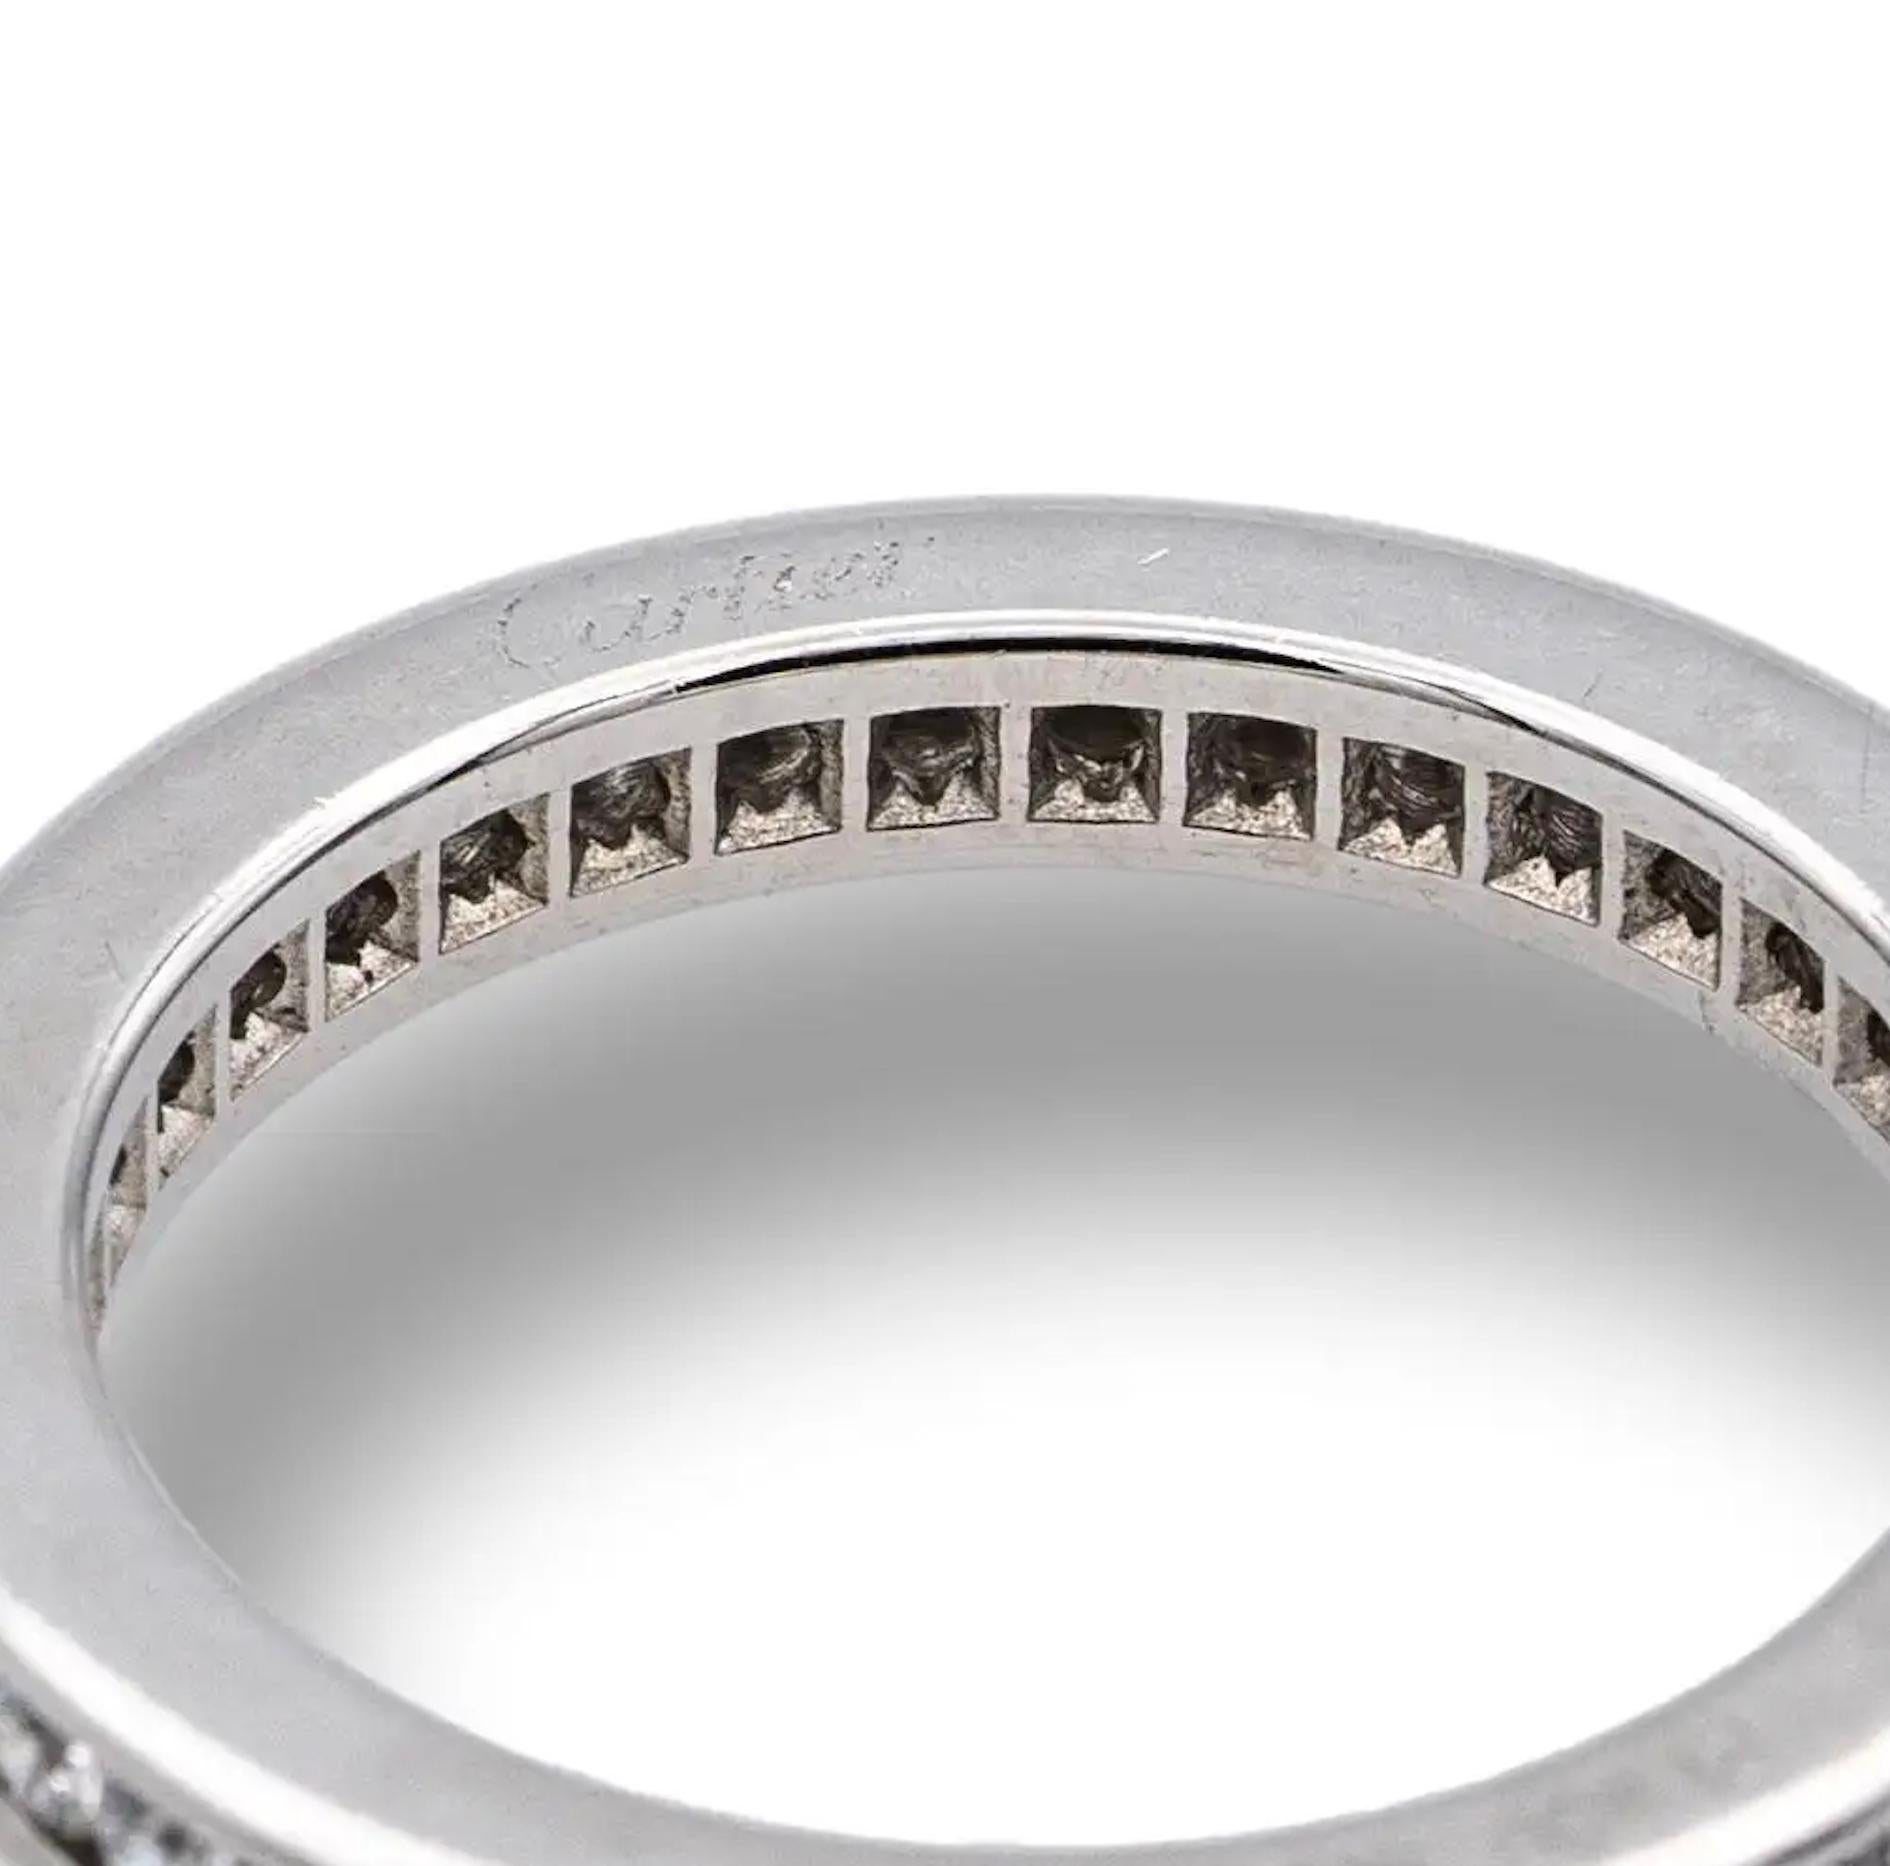 Cartier diamond band ring from the Ballerine collection finely crafted in platinum with channel set round brilliant cut diamonds weighing 0.40 cts total weight approximately set all the way around. Hallmarks are faded. Ring has only been lightly